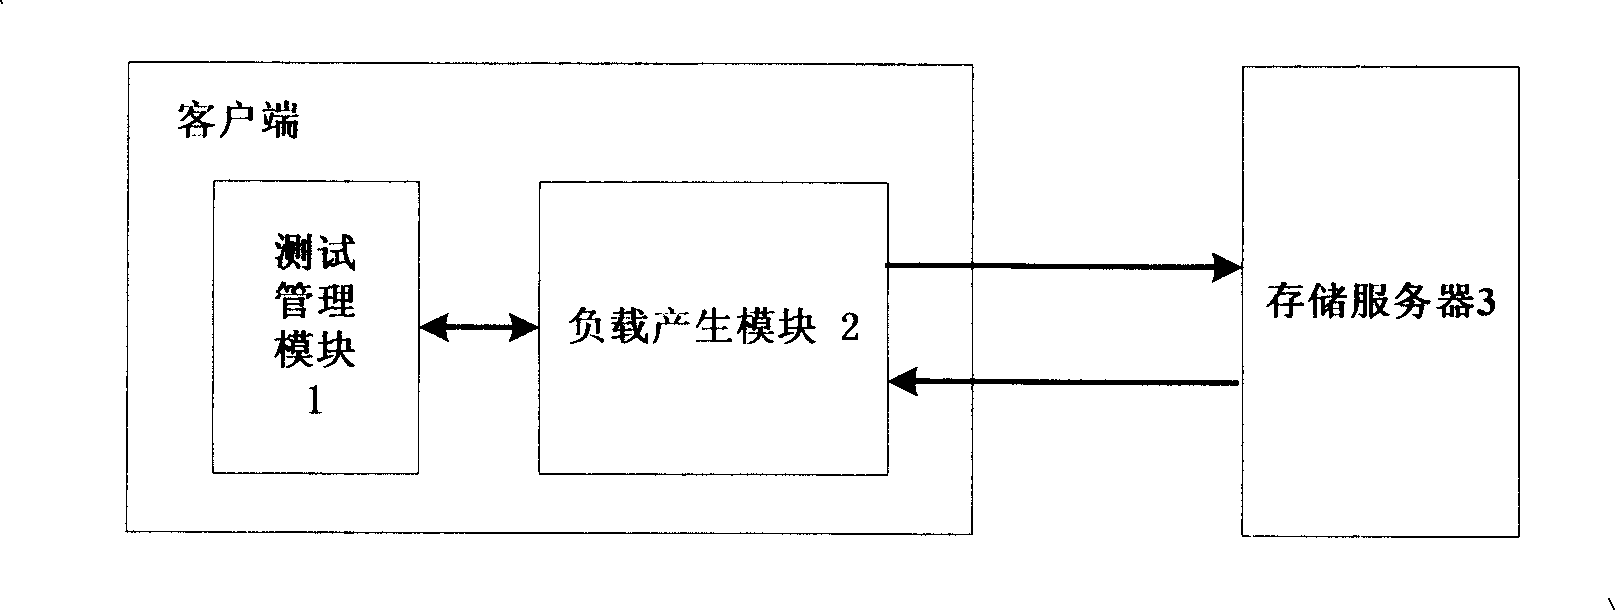 Complex detecting system for storage server property